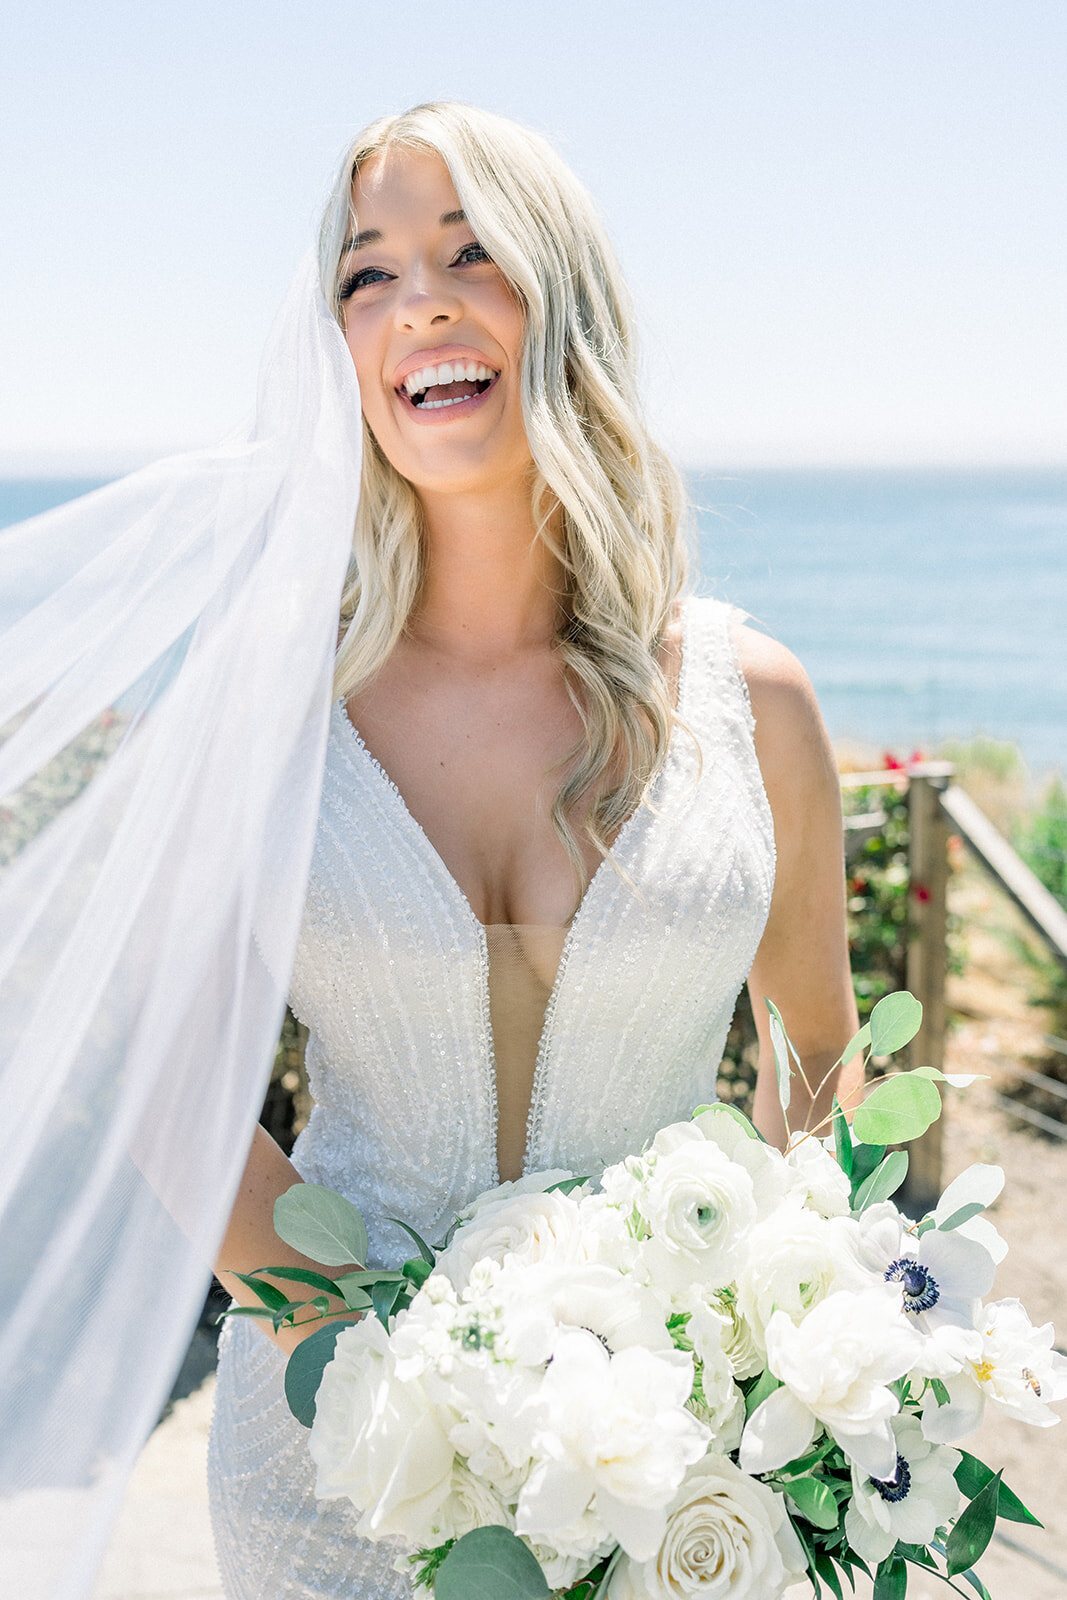 Bride wearing veil holding a white wedding bouquet at Dolphin Bay Resort in Pismo Beach, CA